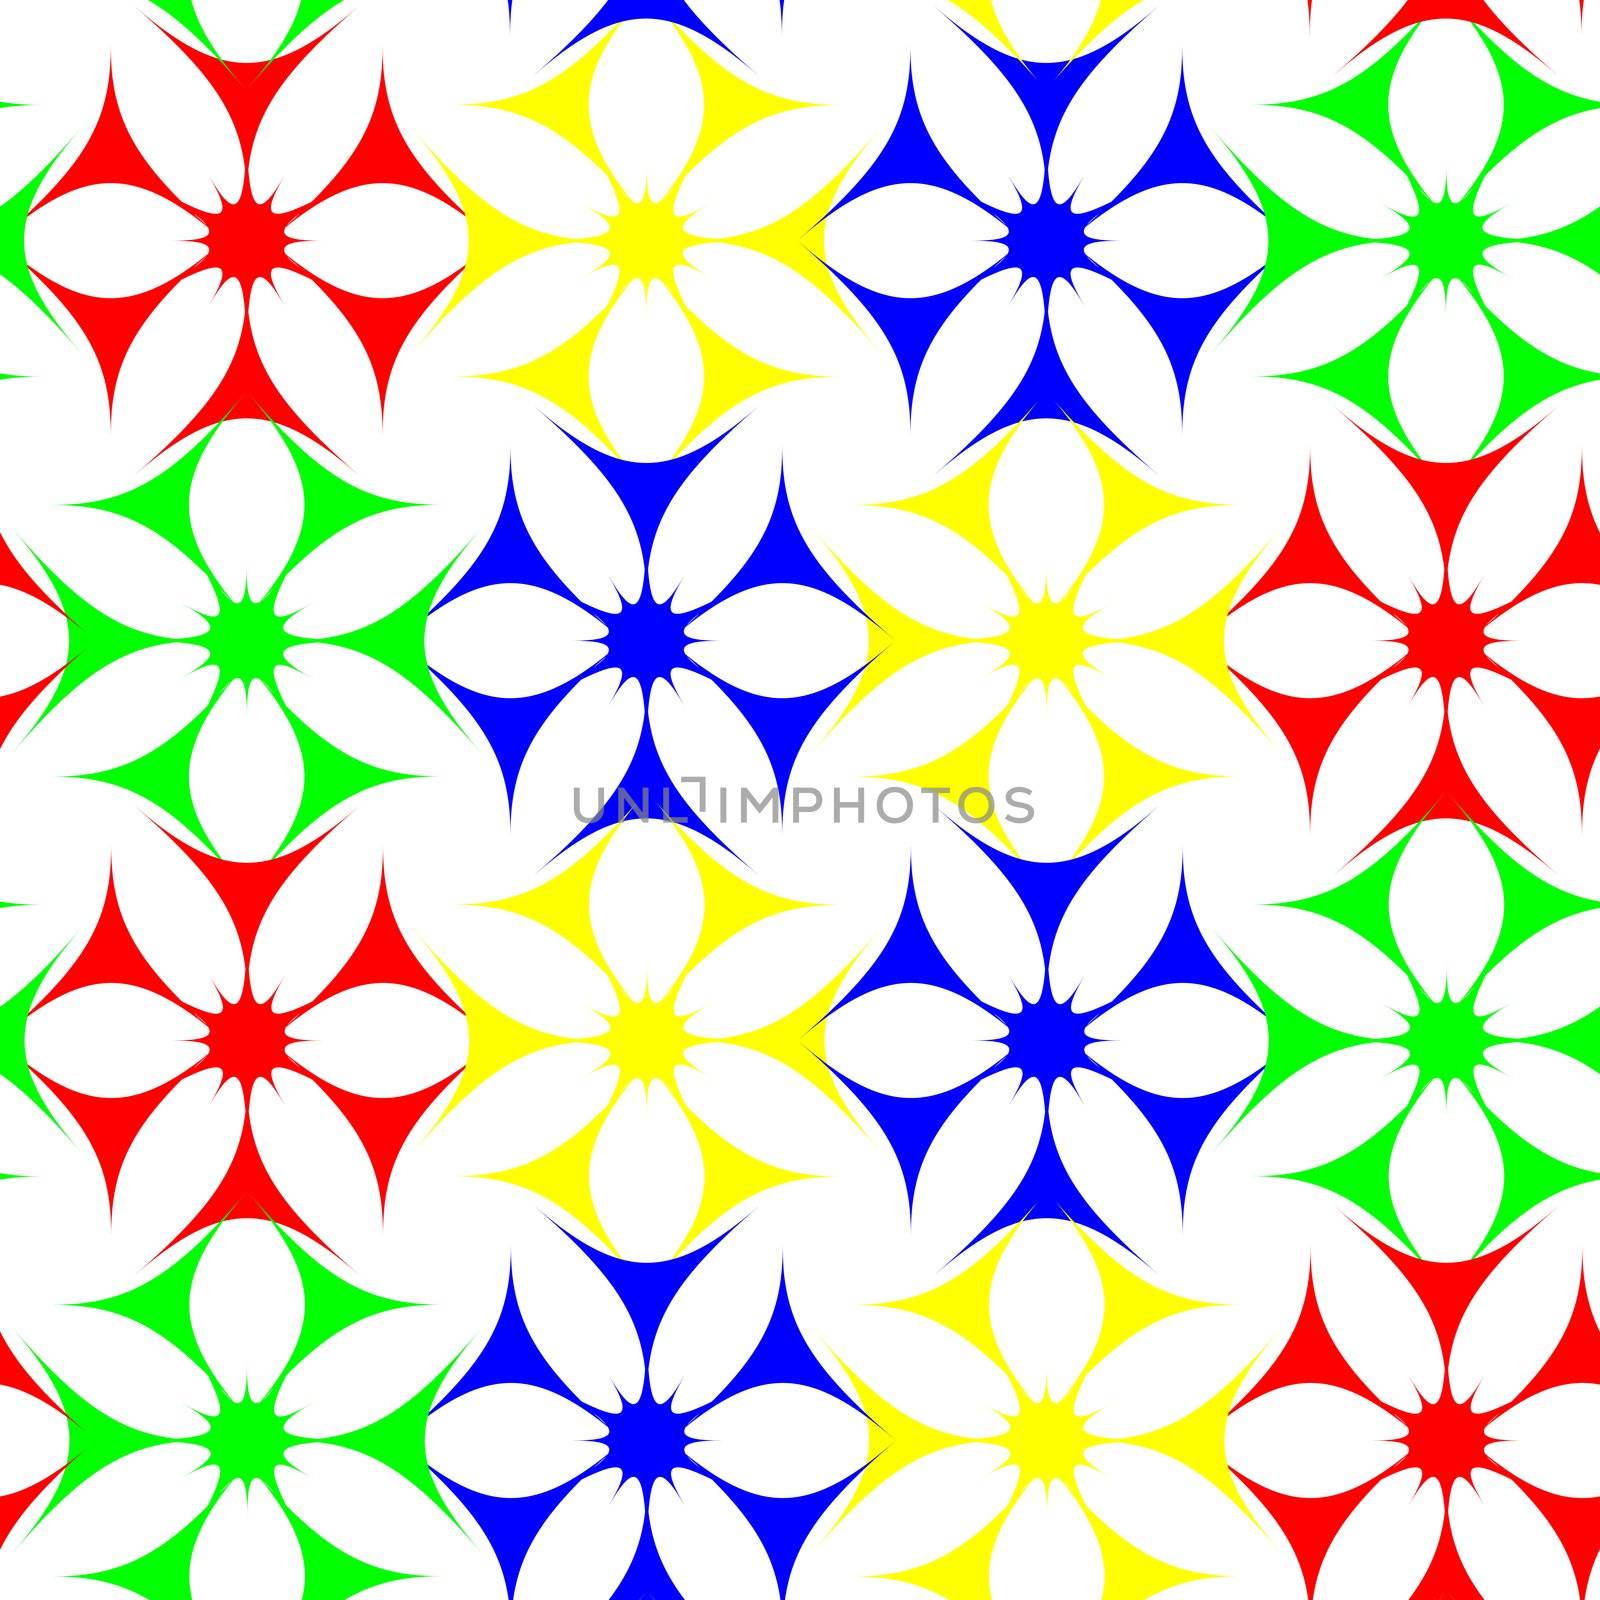 colored flowers seamless pattern by robertosch